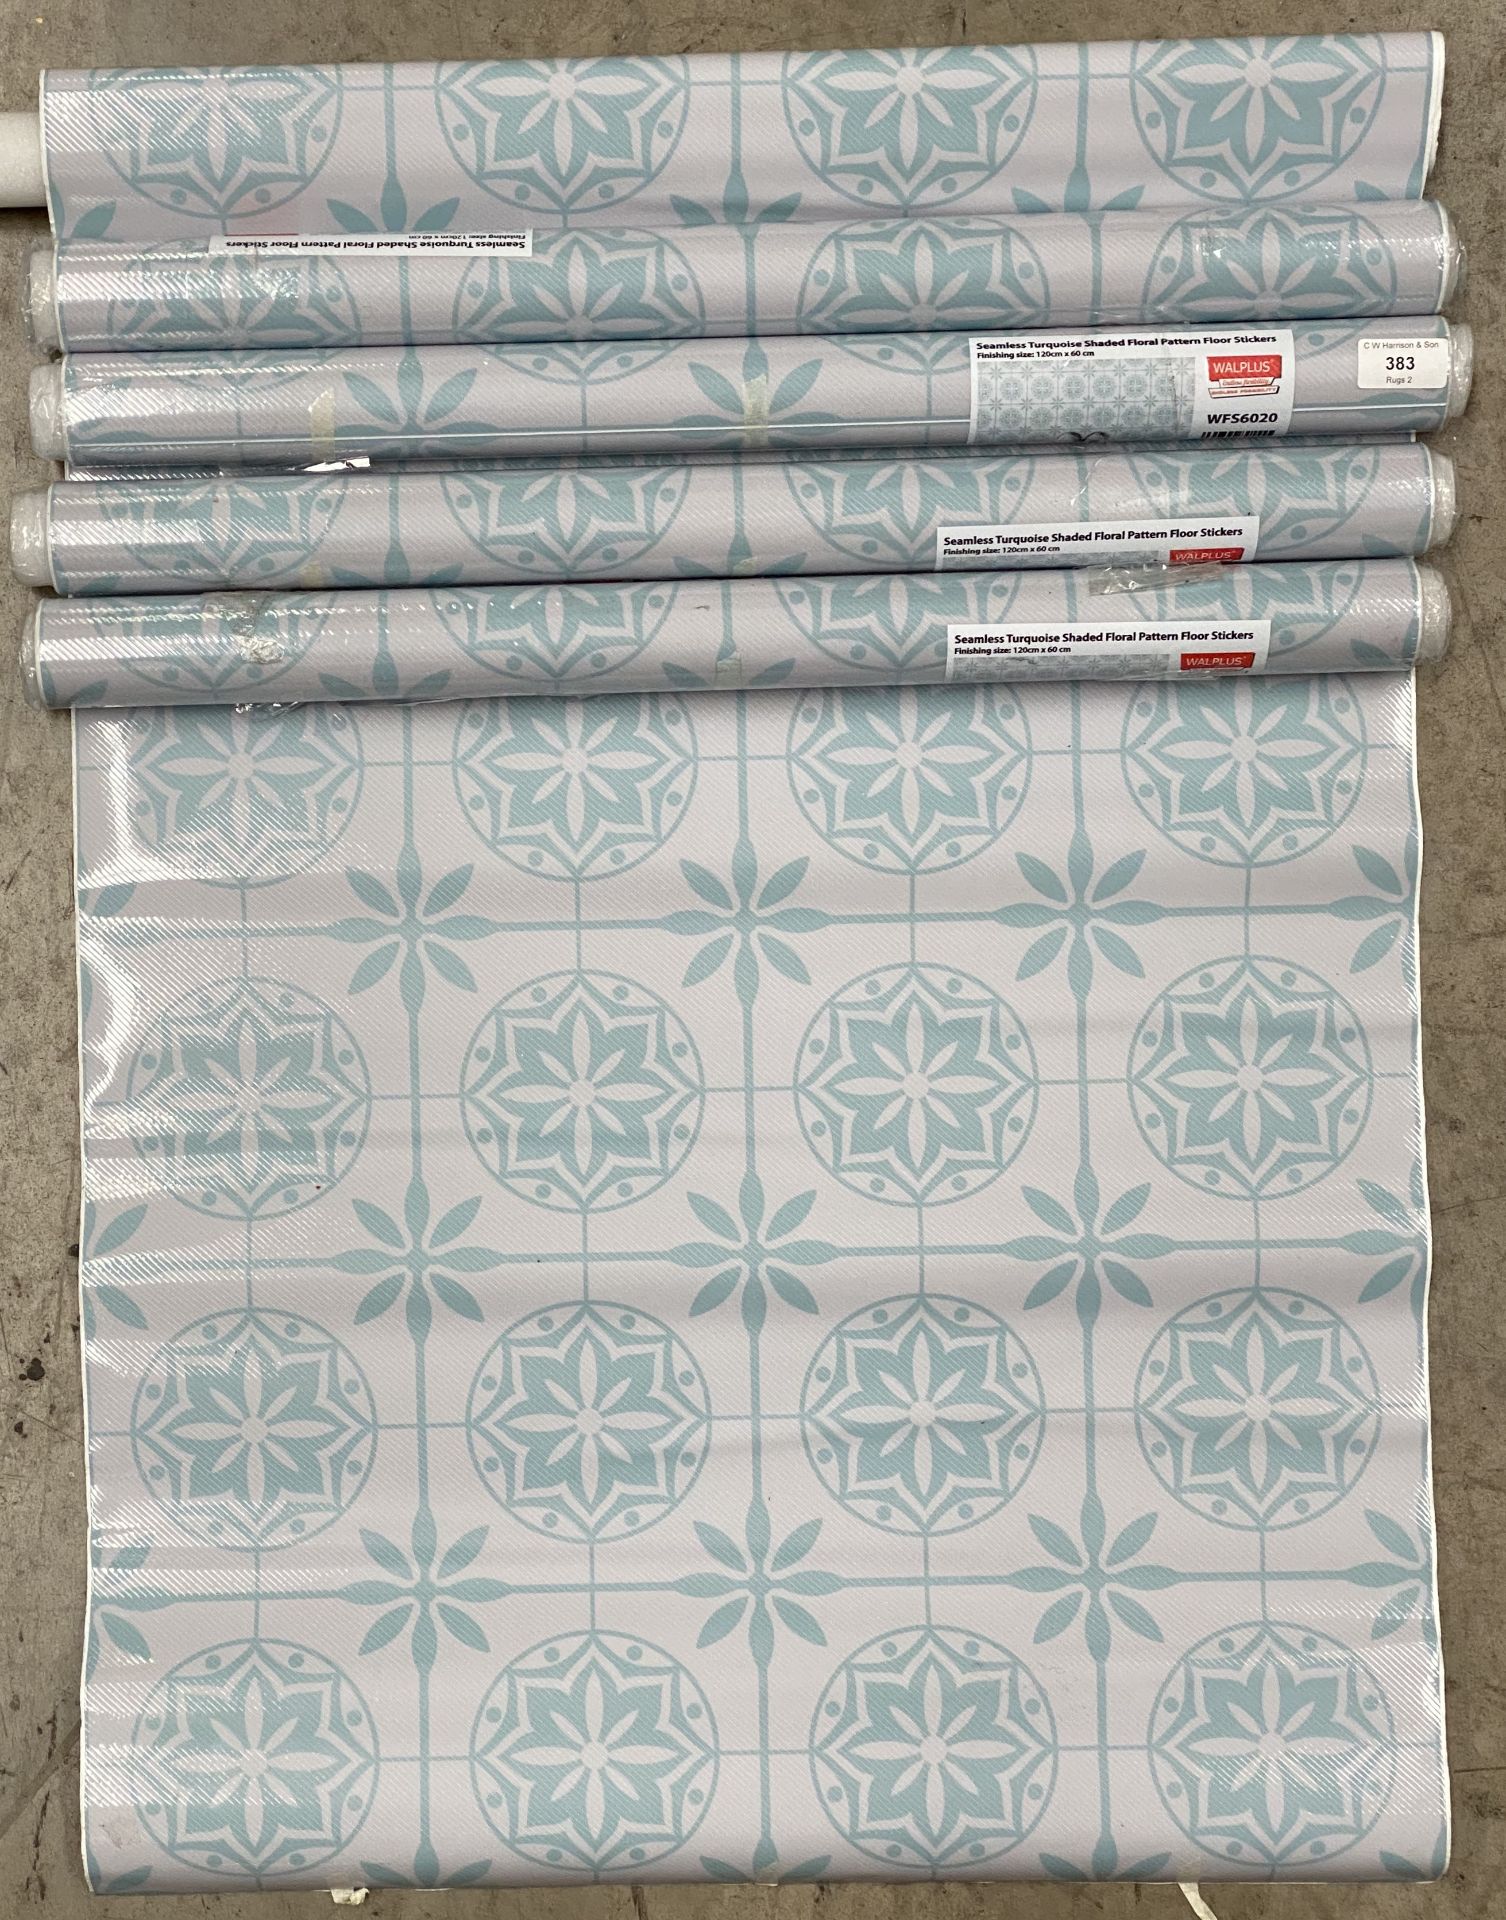 5 x Seamless tuequoise shaded floral petterned floor stickers 120cm x 60cm